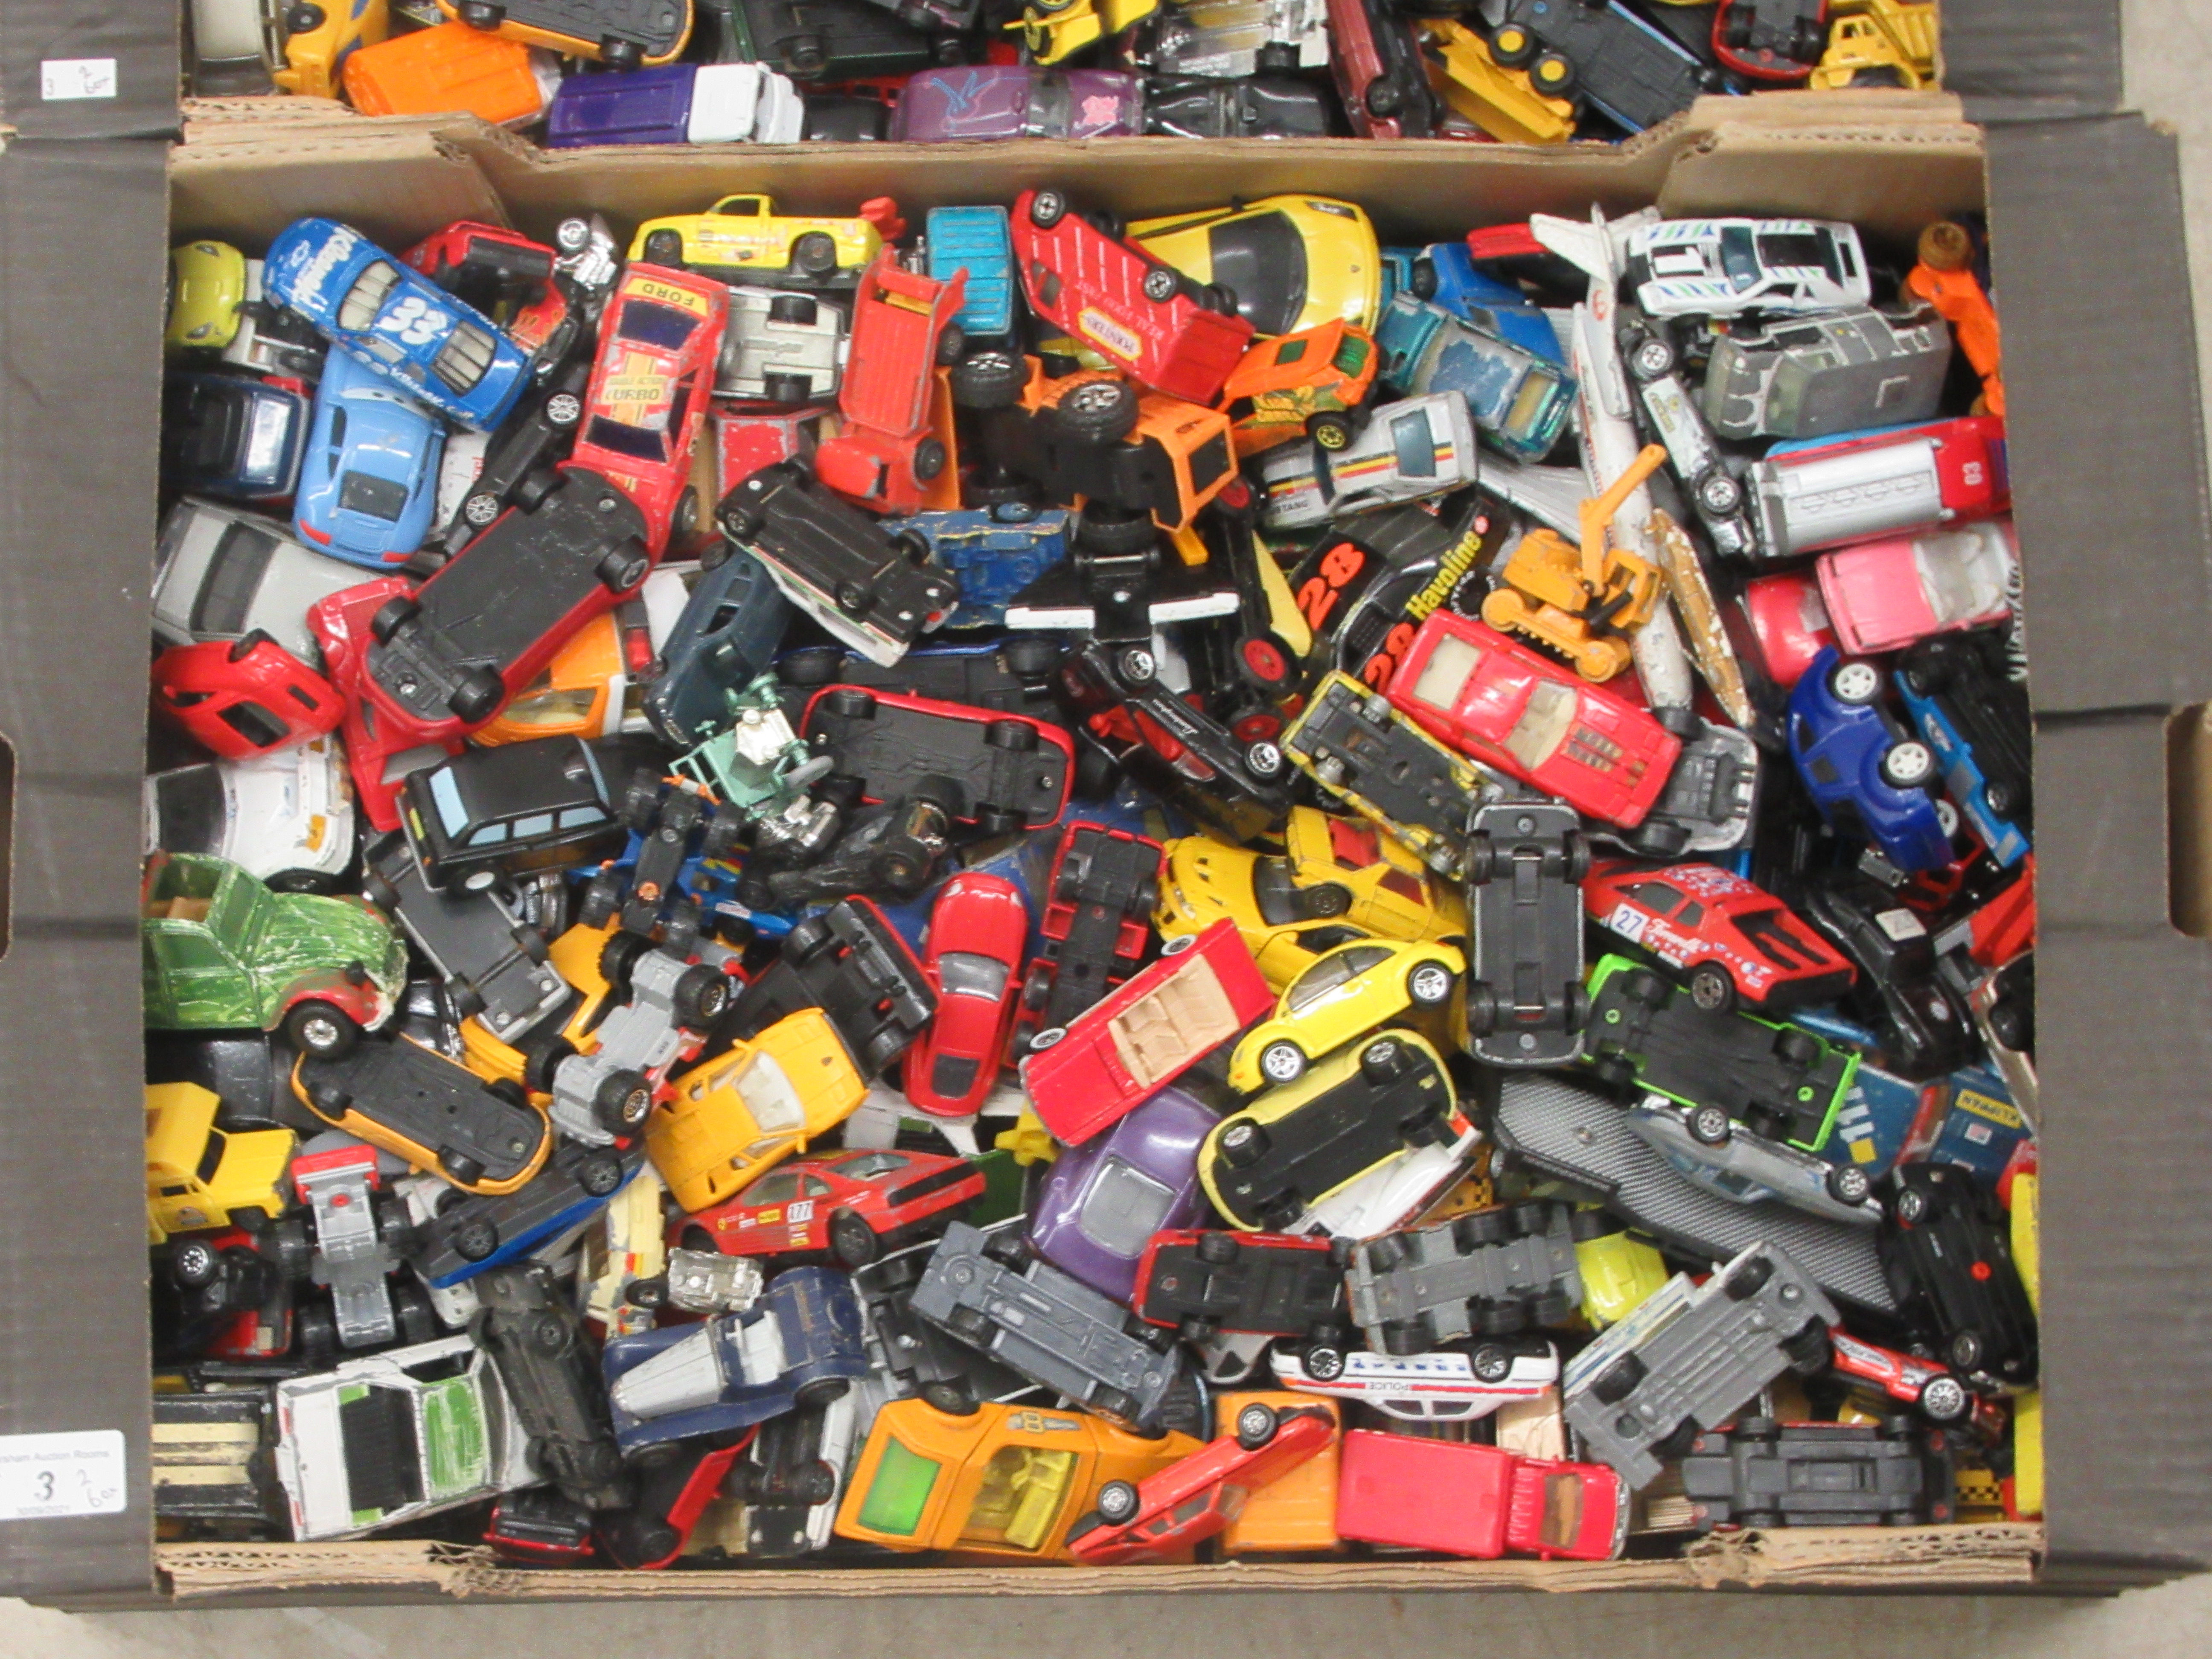 Uncollated diecast model vehicles, sports cars, convertibles, vans and emergency services: to - Image 3 of 3